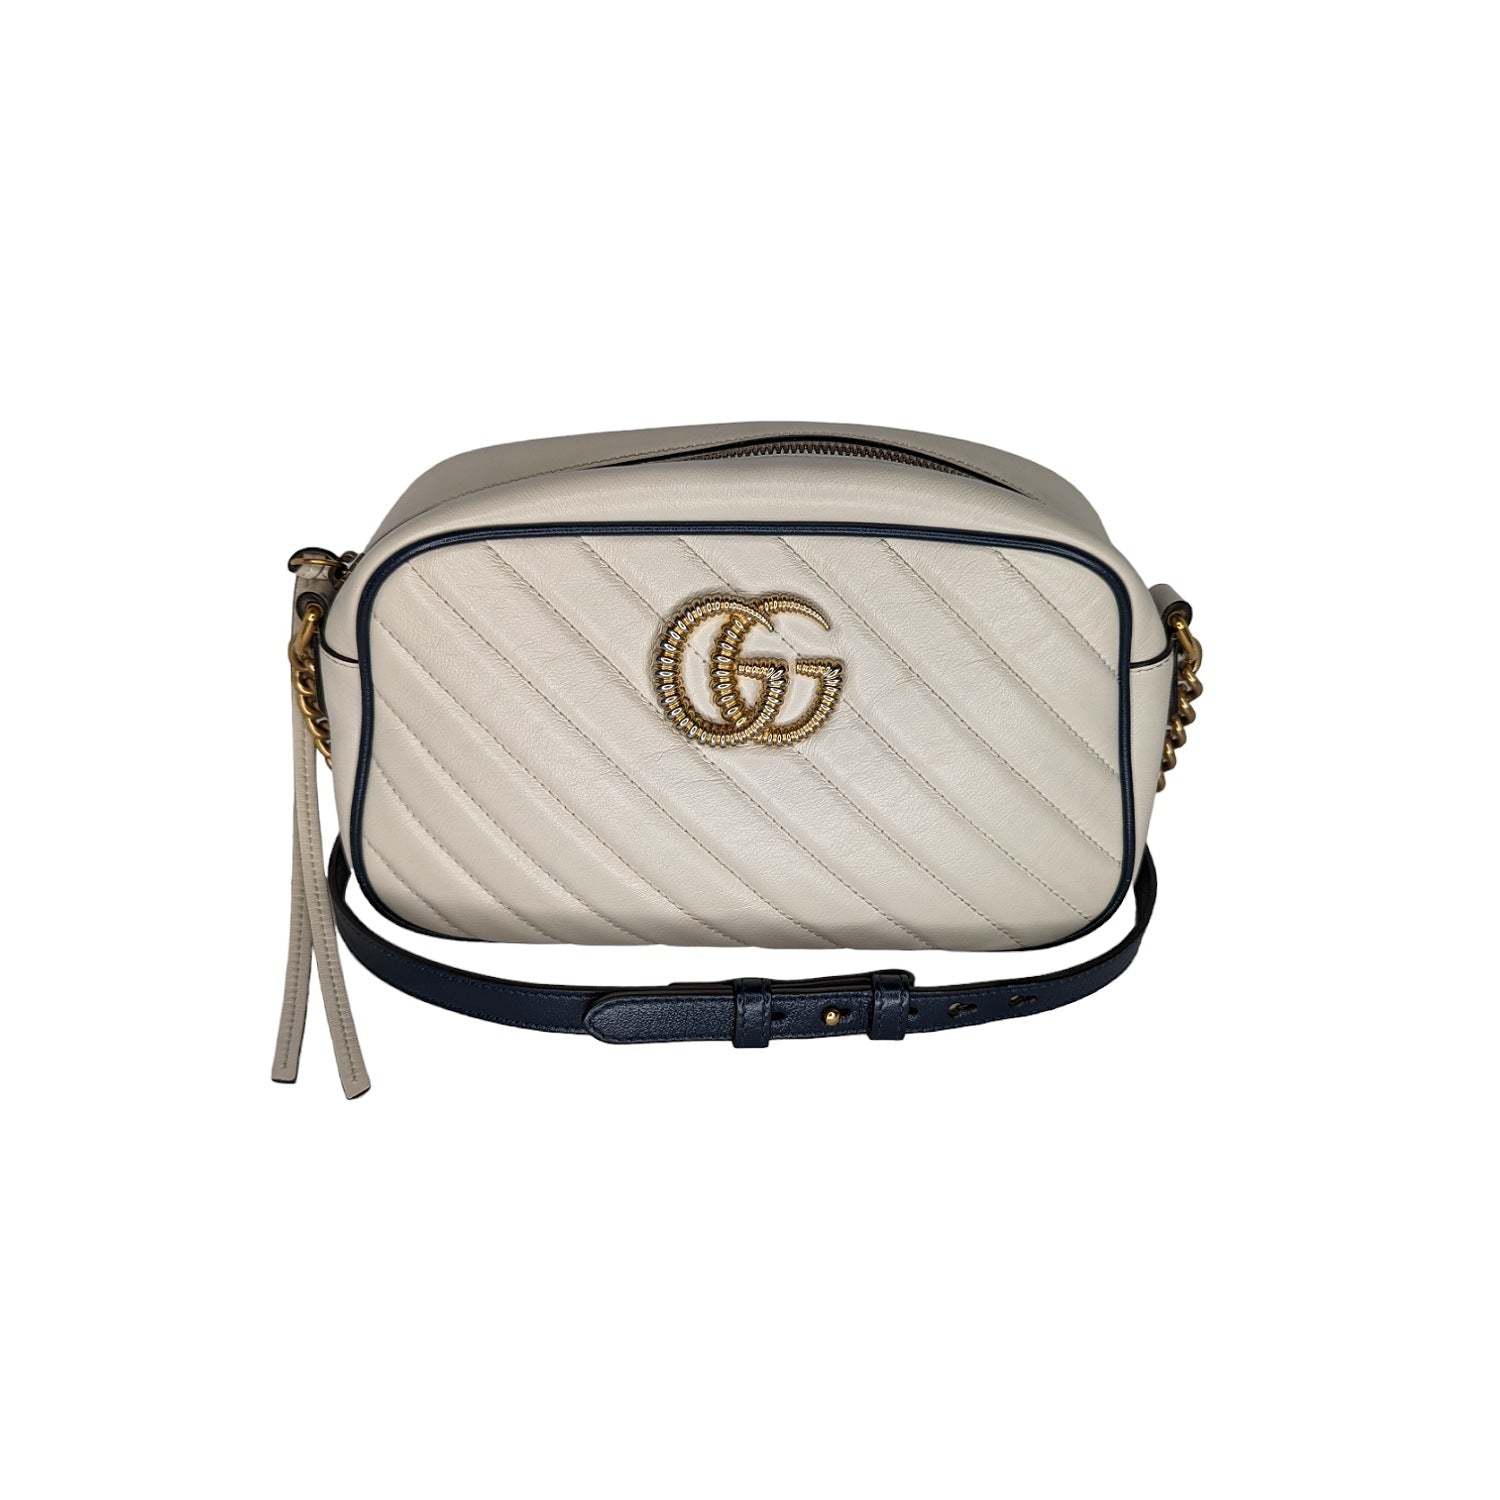 Gucci Pre-Owned Small GG Marmont Camera Bag - Whit